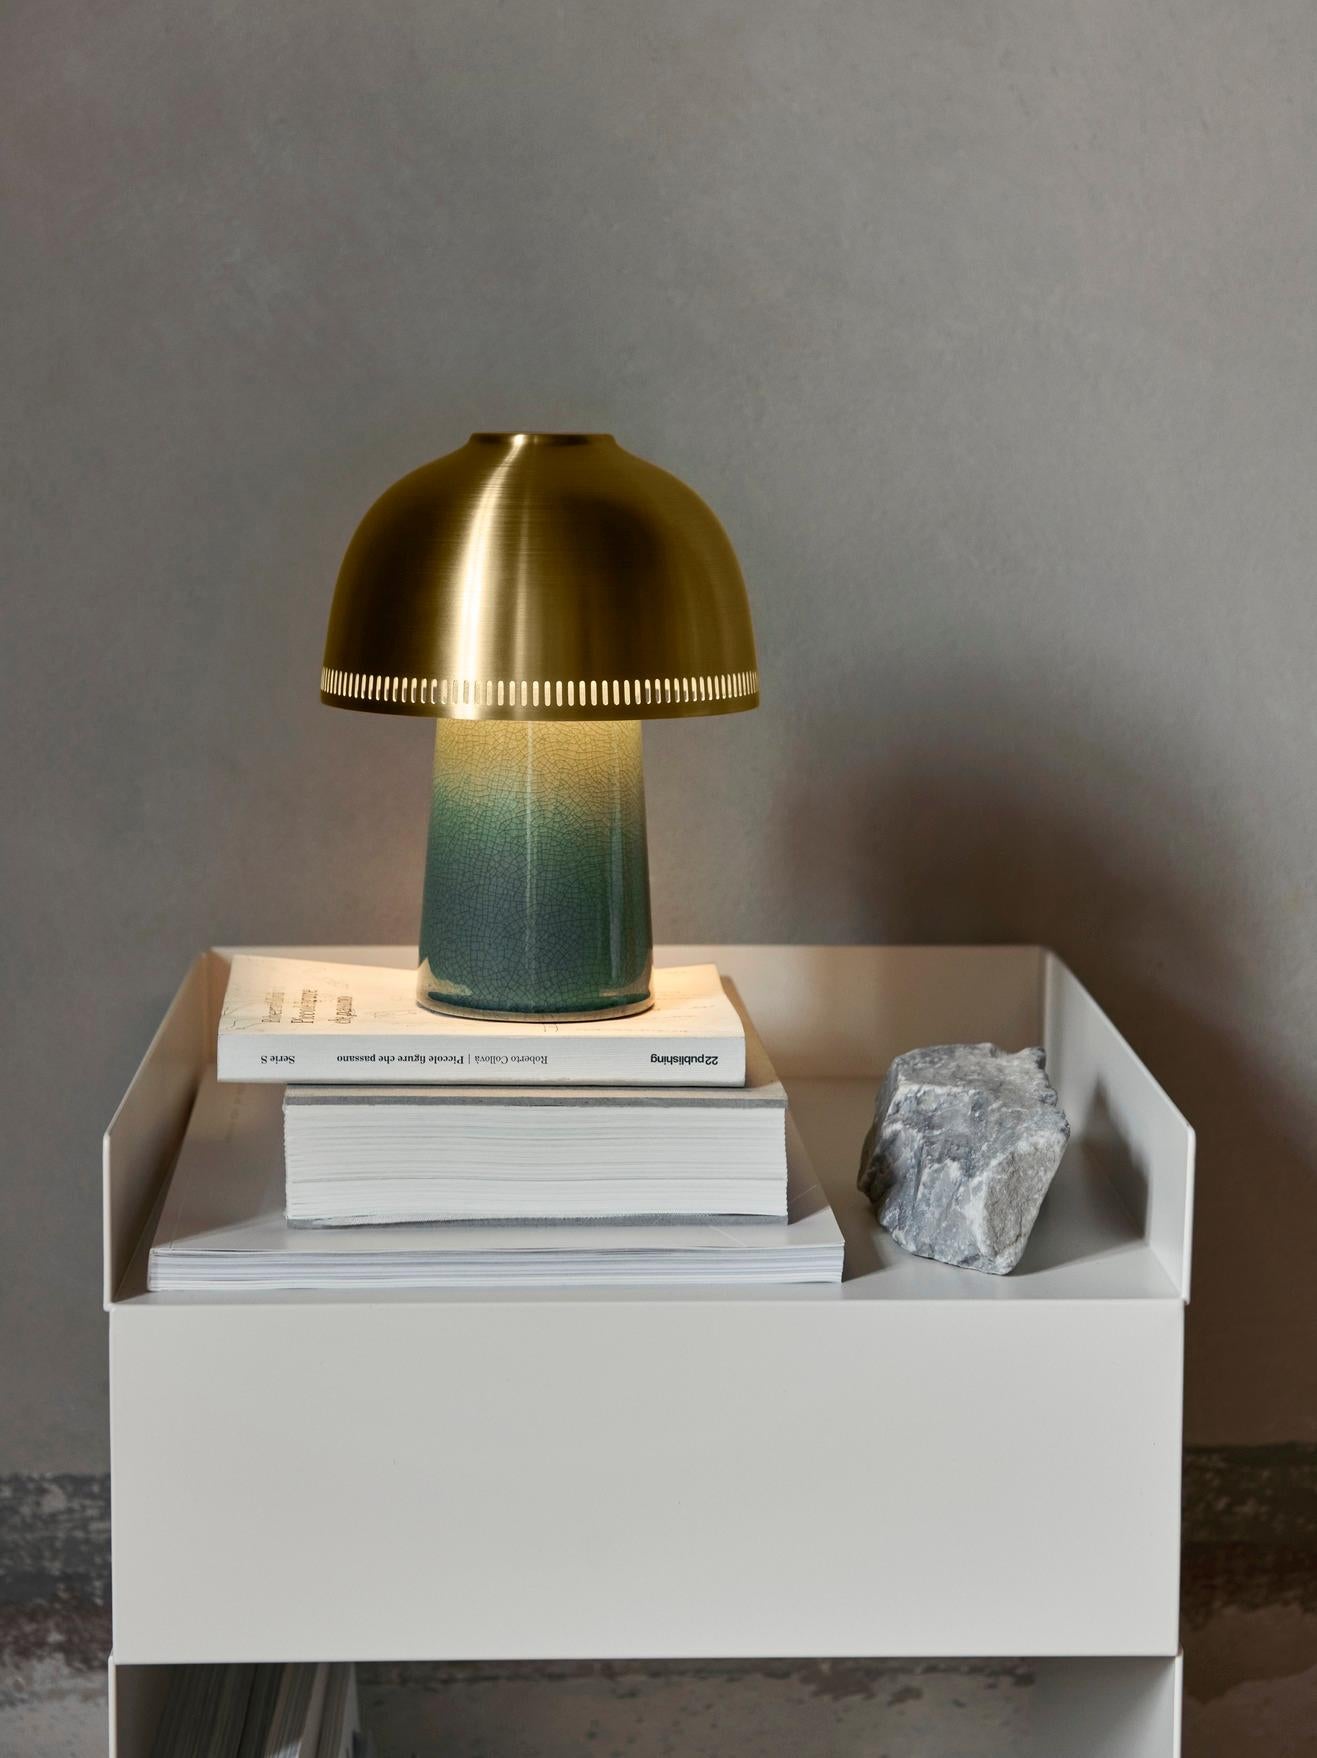 Named after the traditional Japanese pottery technique, Raku is a compact lamp with considerable presence. Drawing inspiration from the age-old art form, the lamp features a hand-sculpted ceramic base with a crackle glaze that varies slightly in